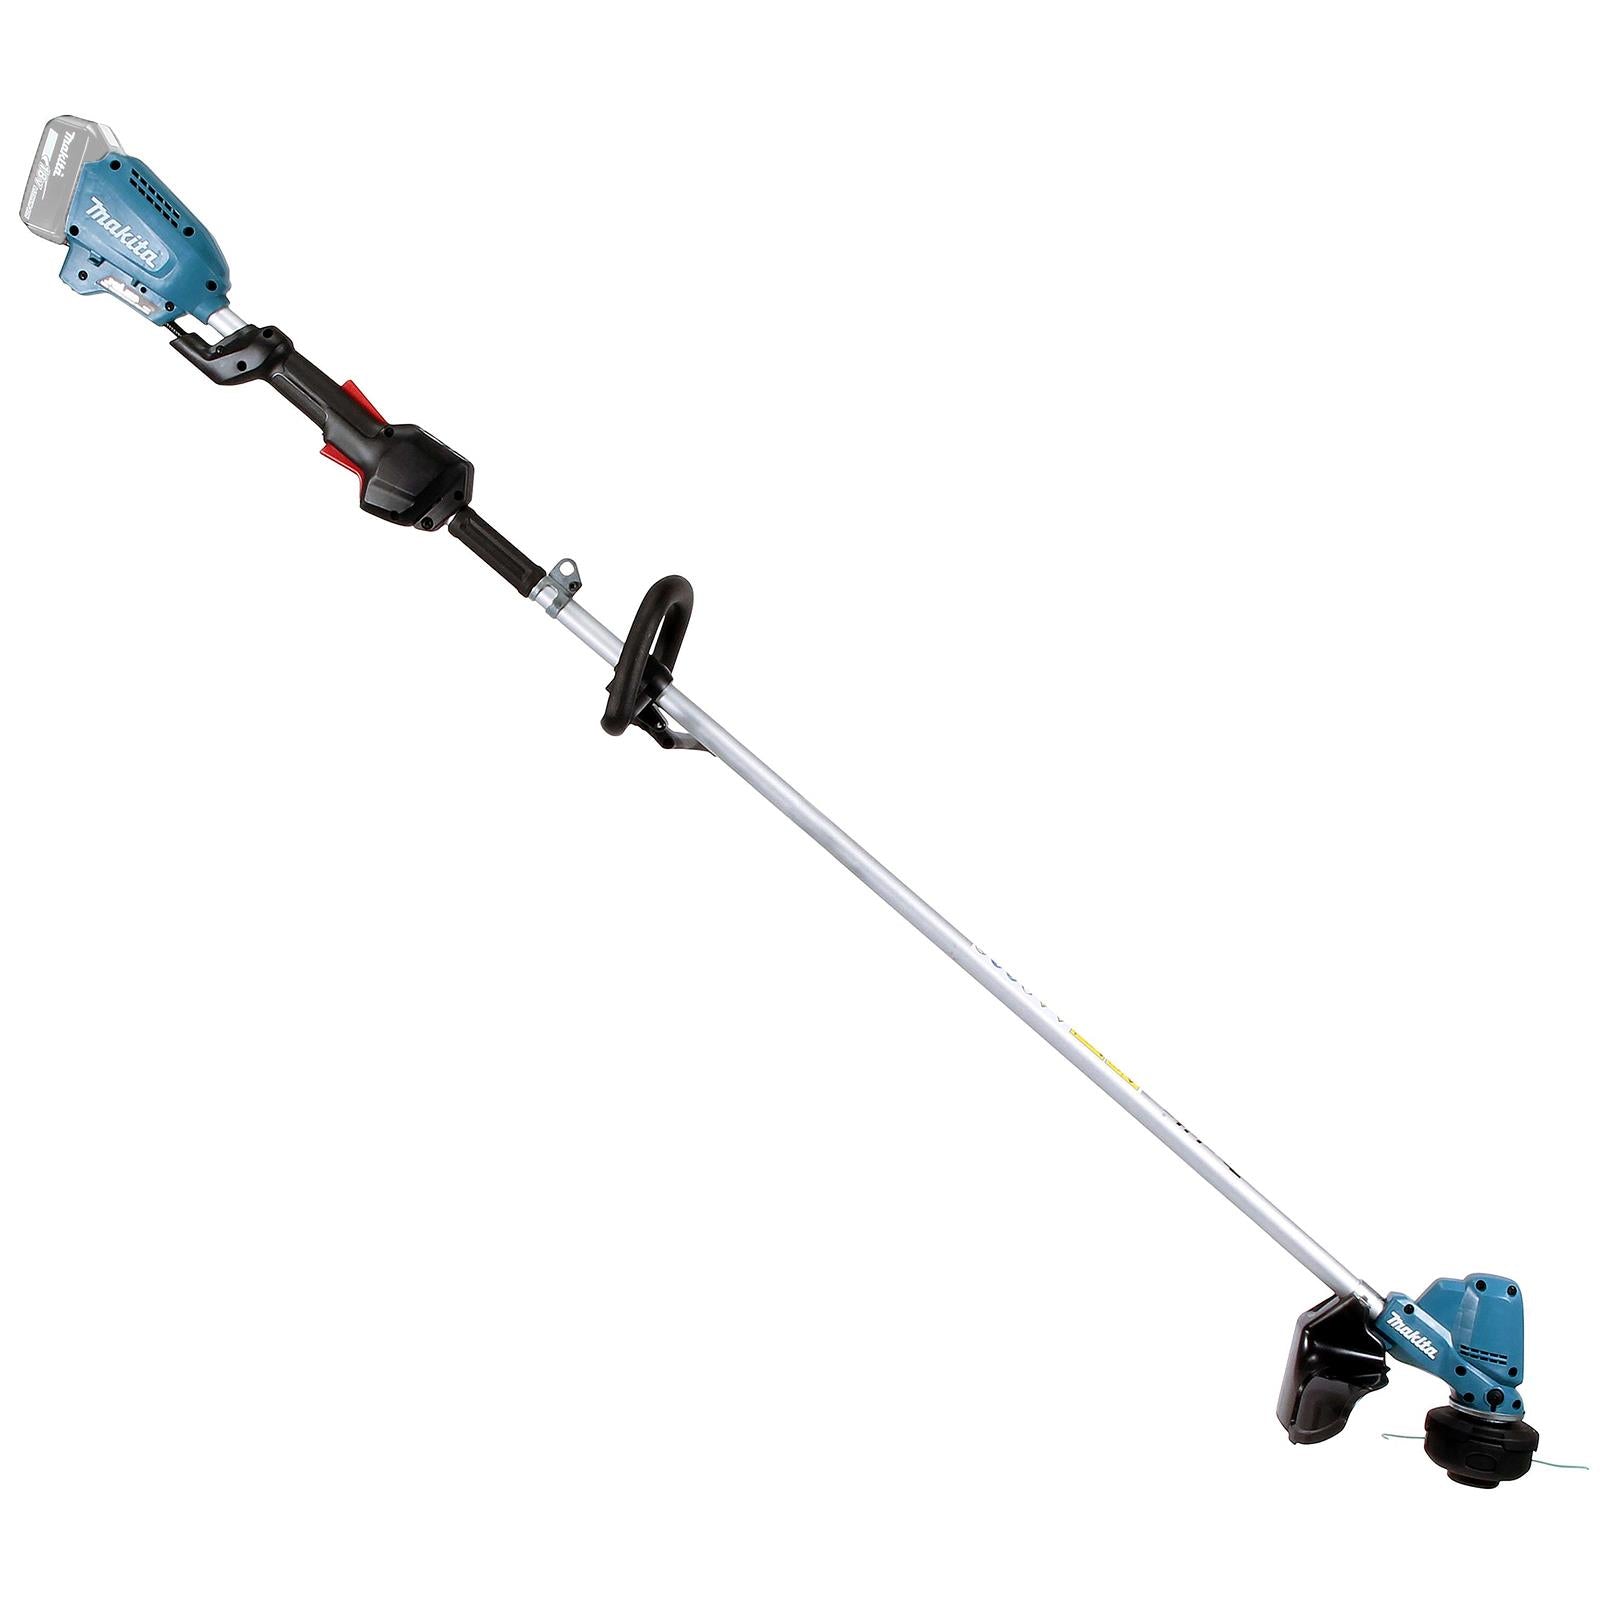 Makita Line Trimmer Strimmer 18V LXT Brushless Cordless Garden Lawn Strimming Bare Unit Body Only DUR190LZX3